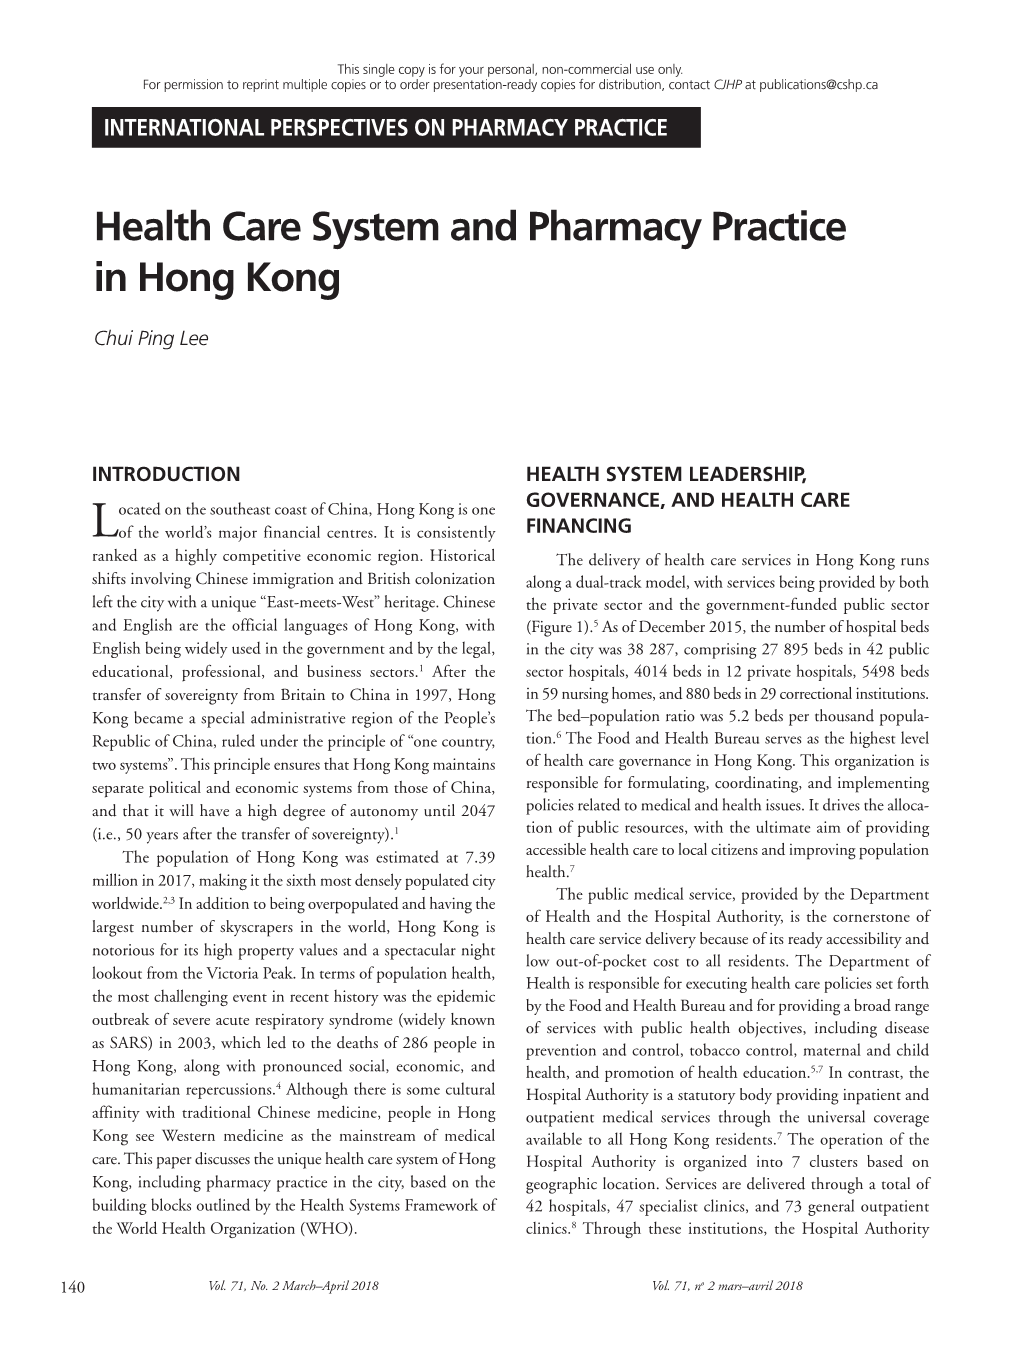 Health Care System and Pharmacy Practice in Hong Kong